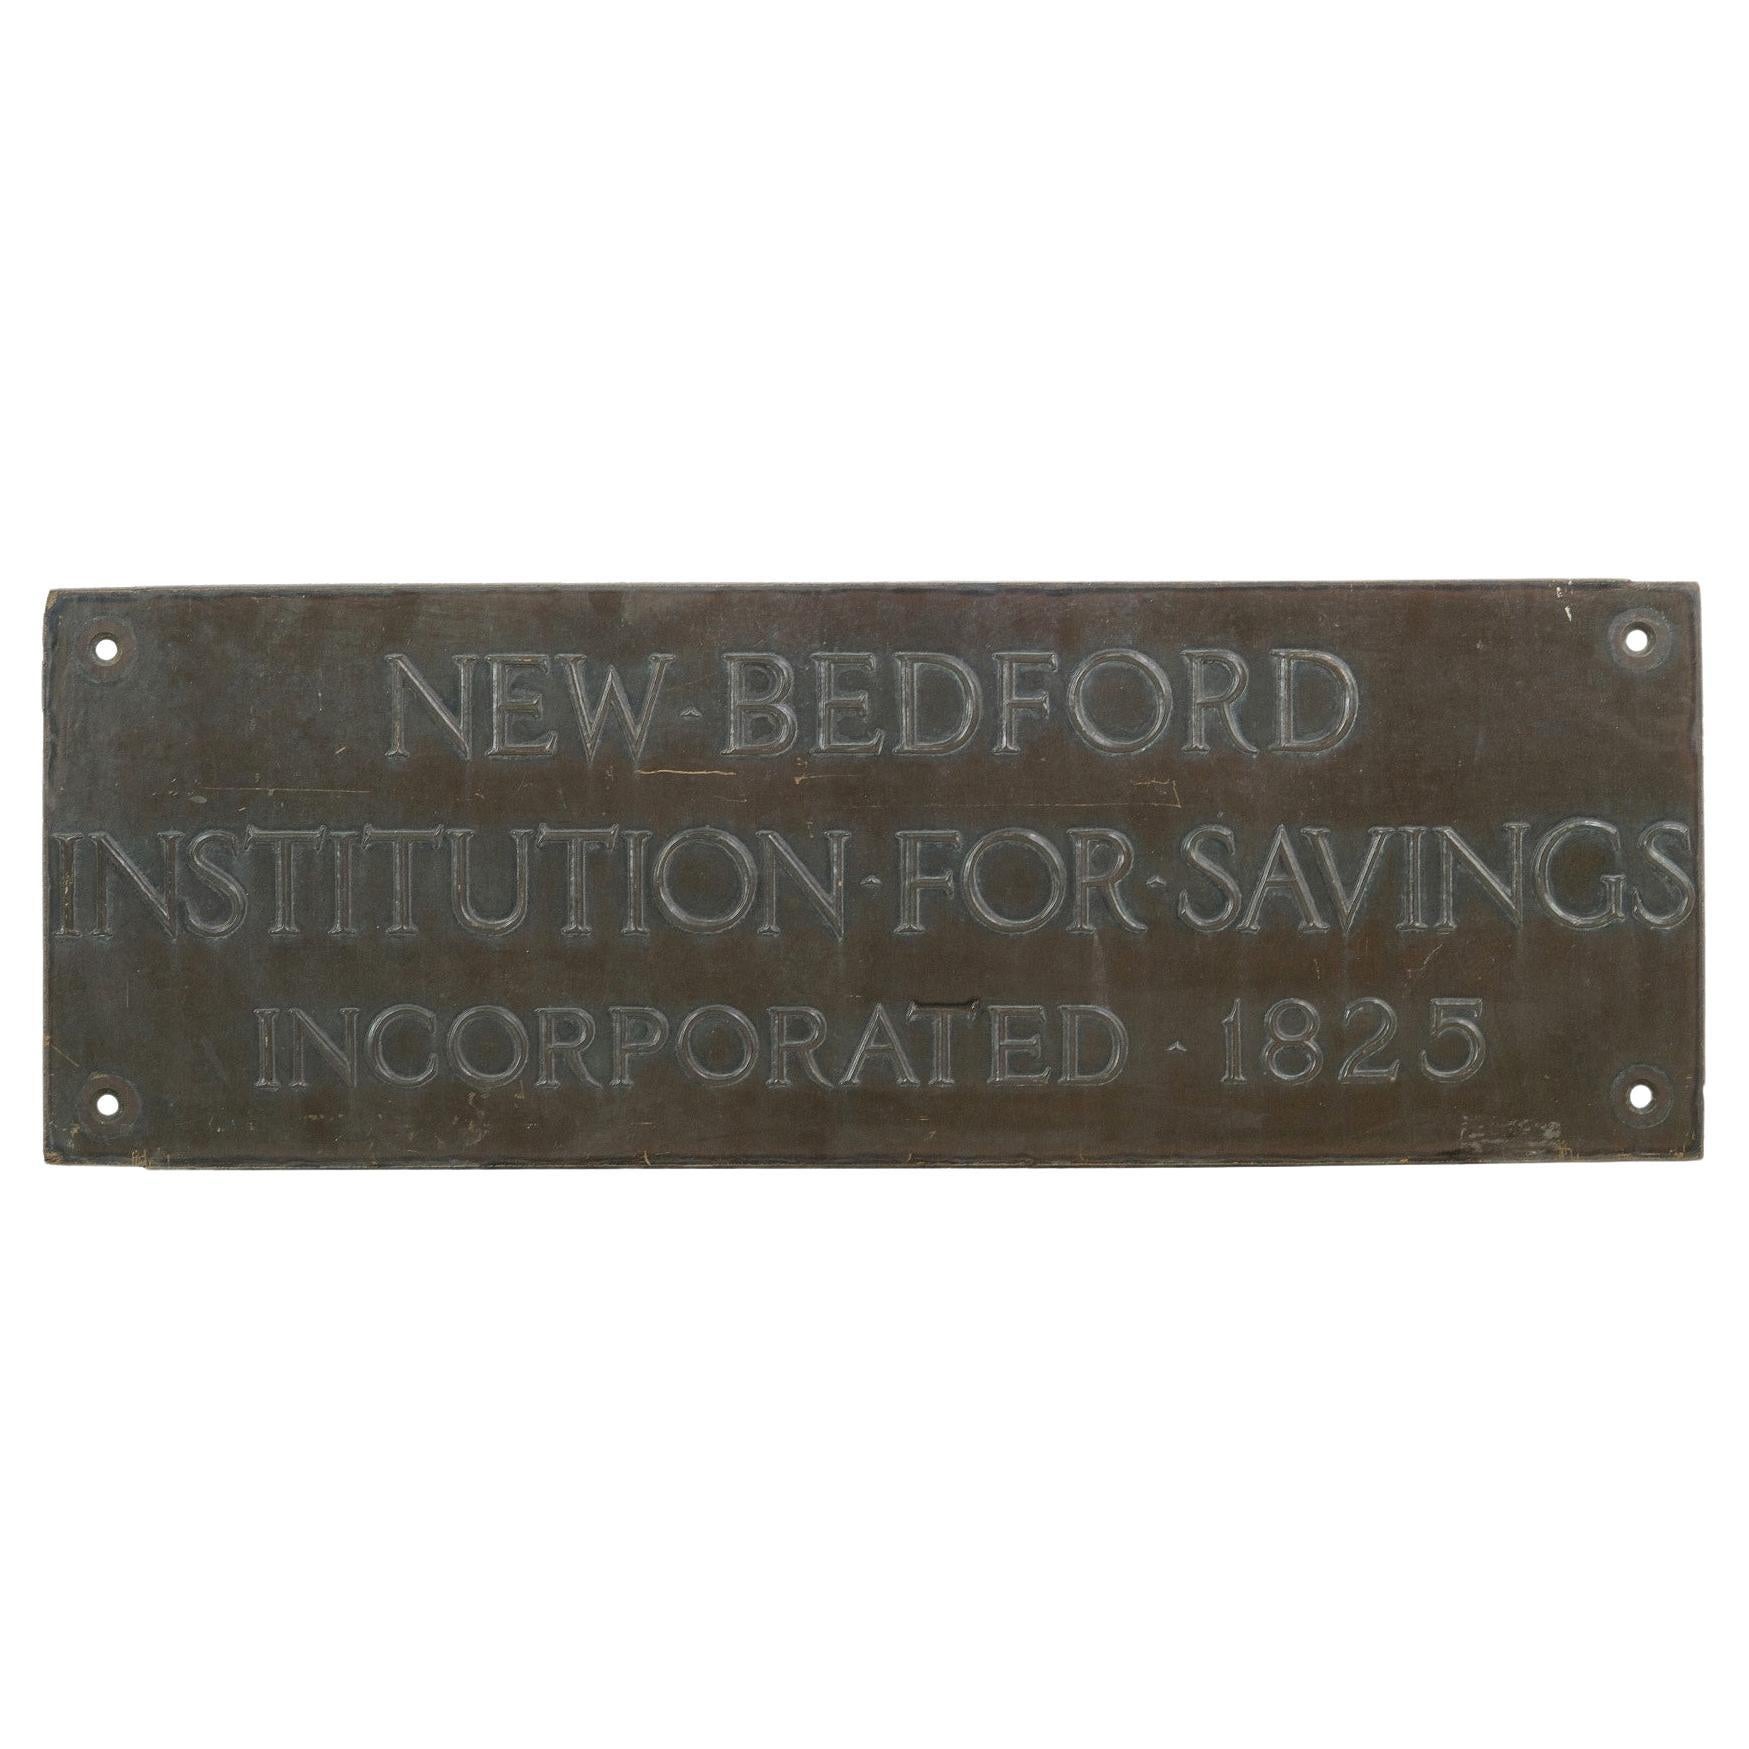 1825 Bronze Plaque from New Bedford Institution for Savings Incorporated For Sale